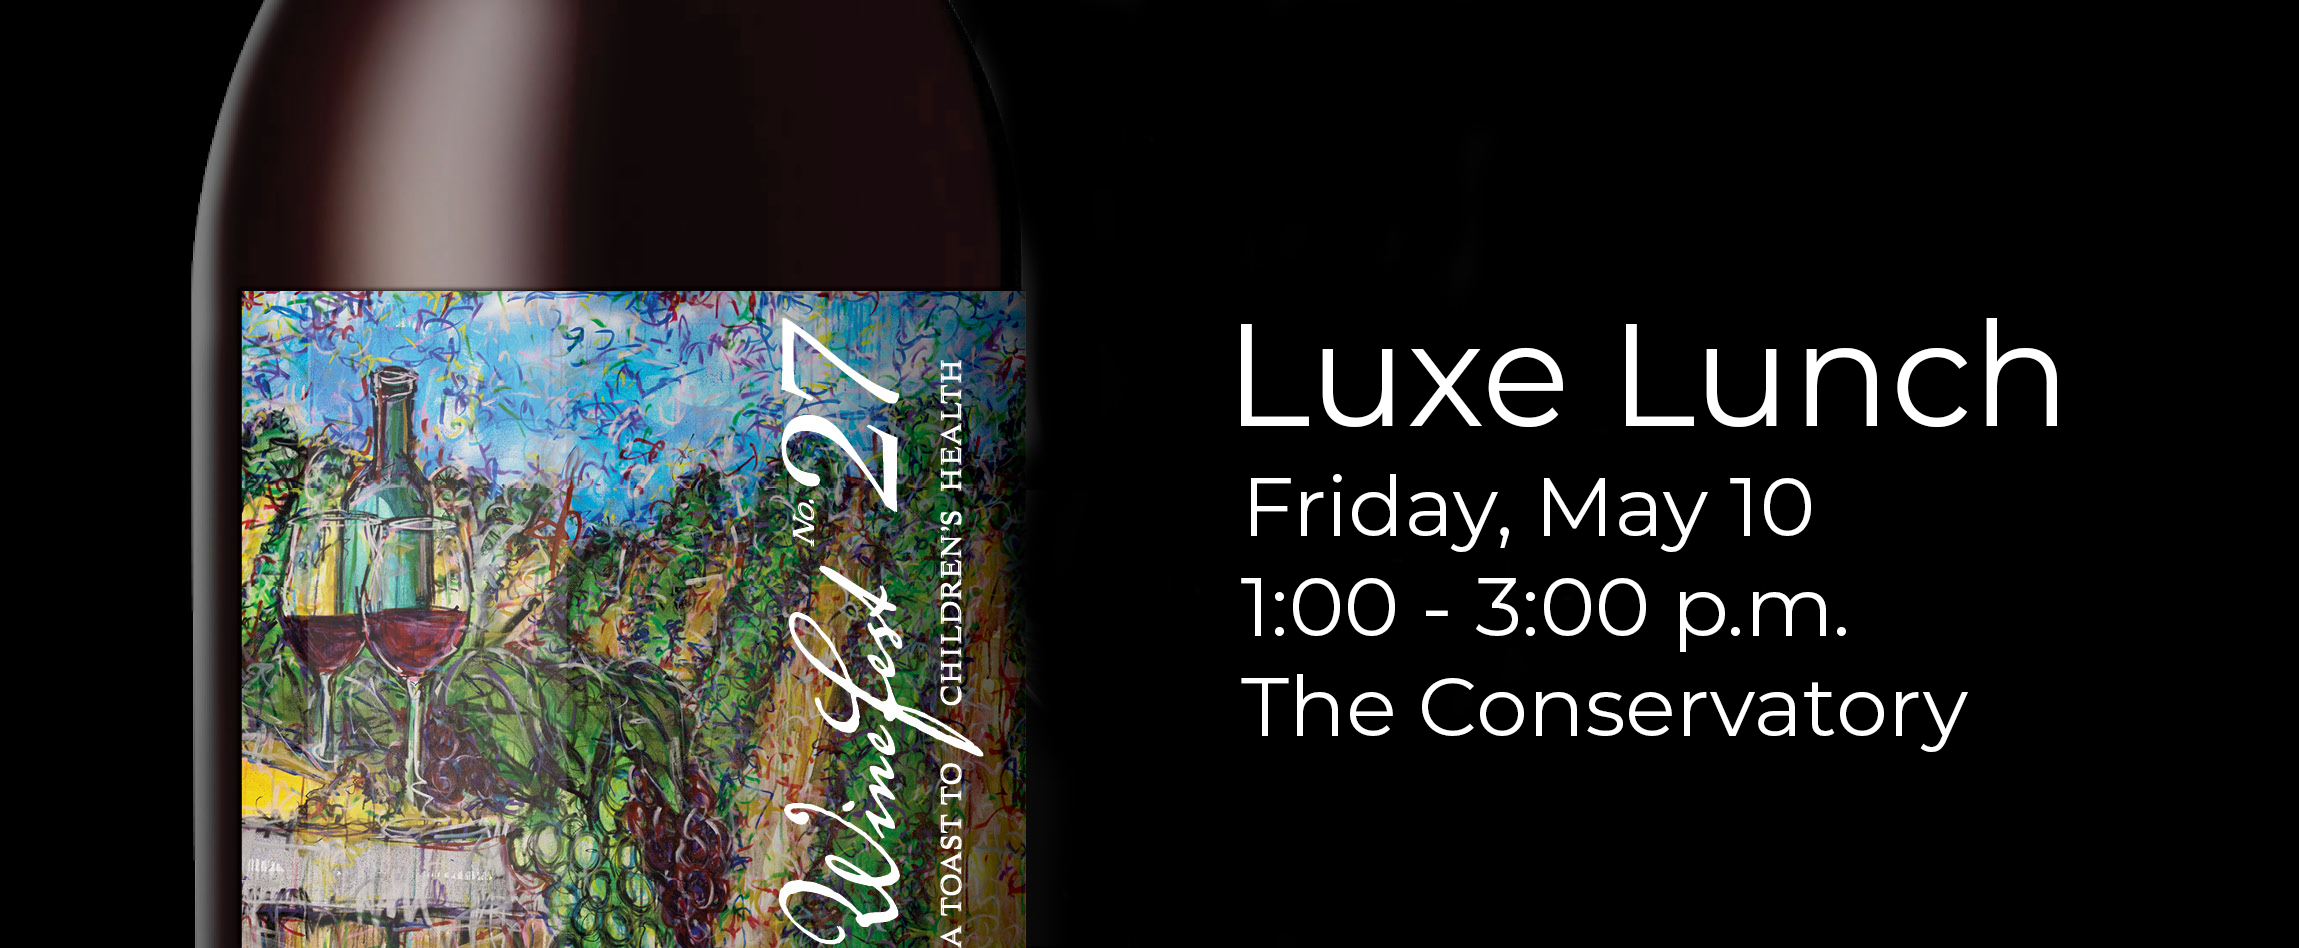 WineFest No. 27 - Luxe Lunch